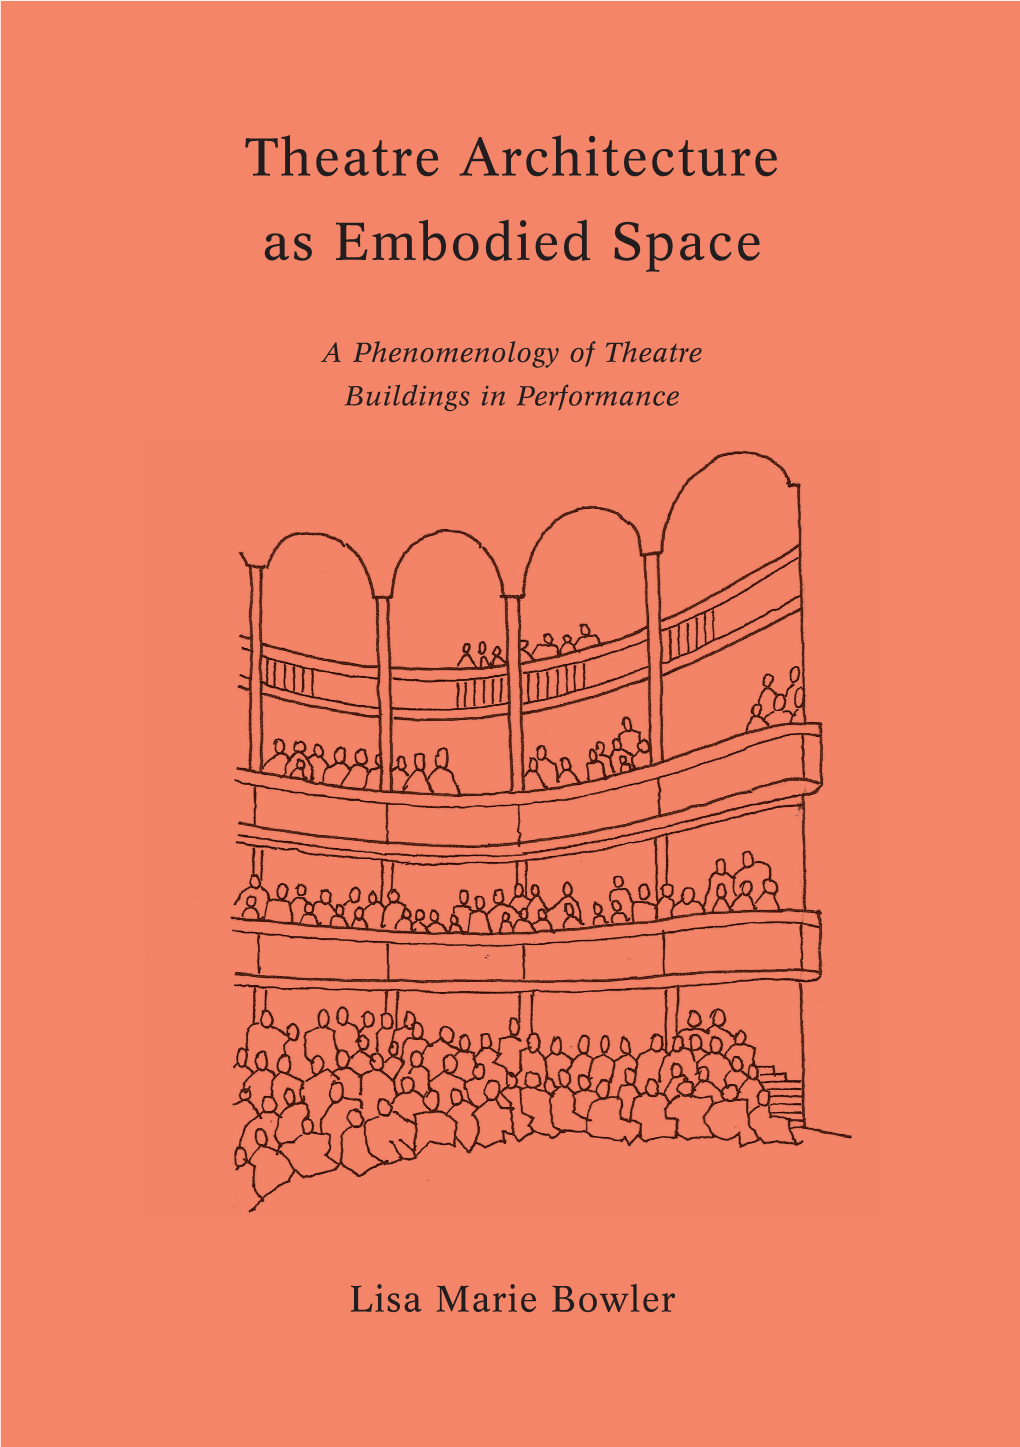 Theatre Architecture As Embodied Space: a Phenomenology of Theatre Buildings in Performance